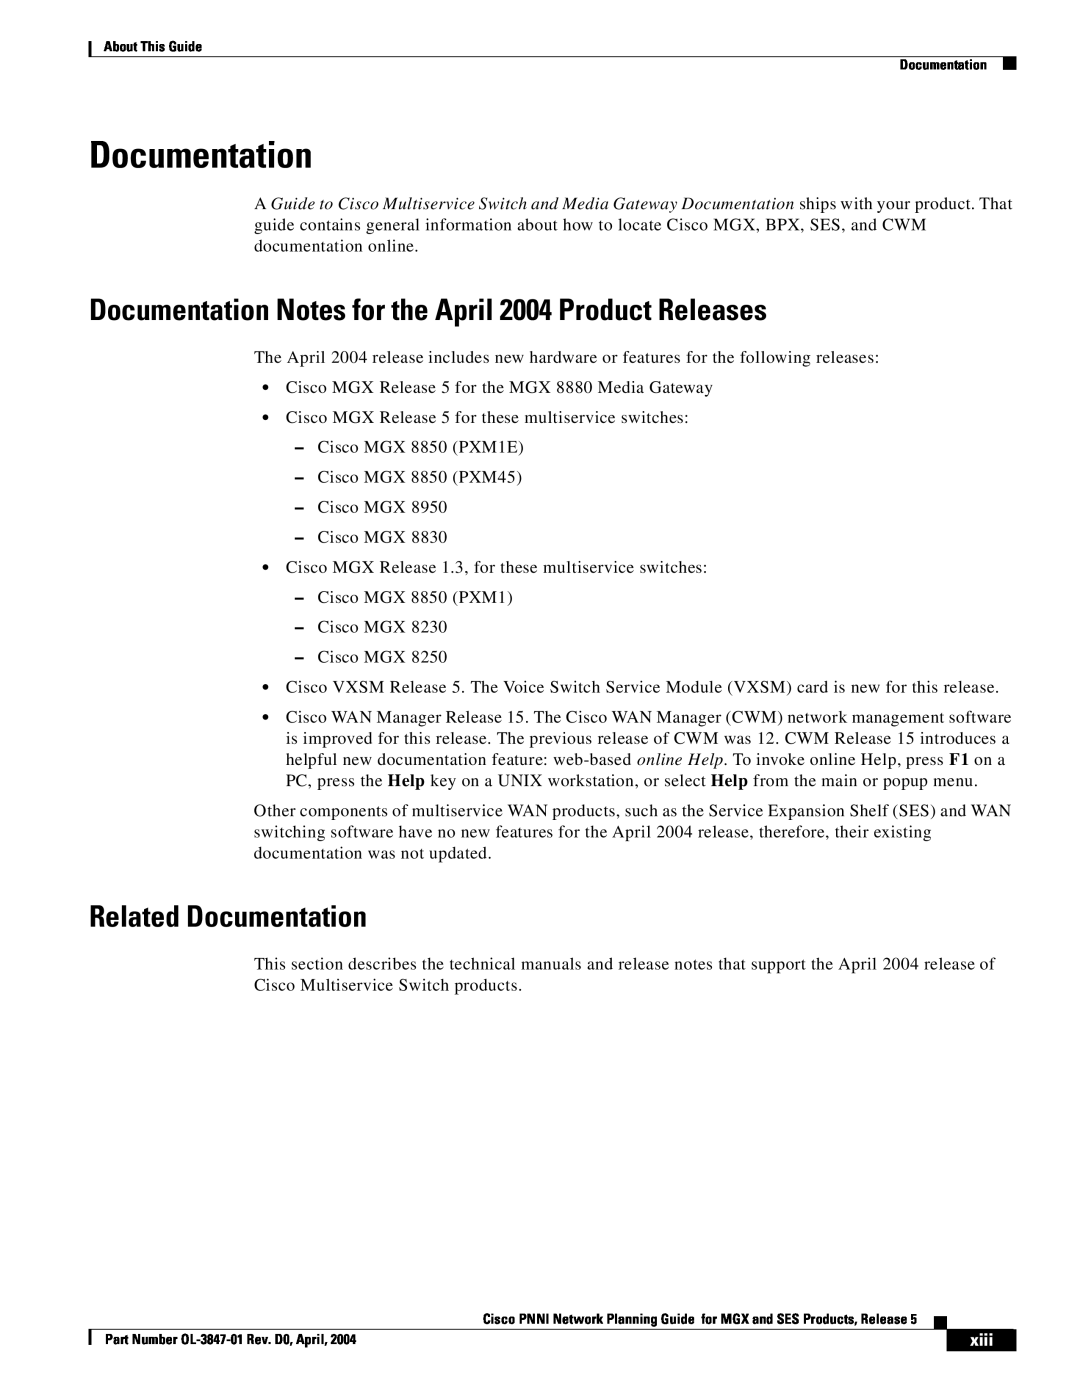 Cisco Systems Network Router Documentation Notes for the April 2004 Product Releases, Related Documentation, xiii 